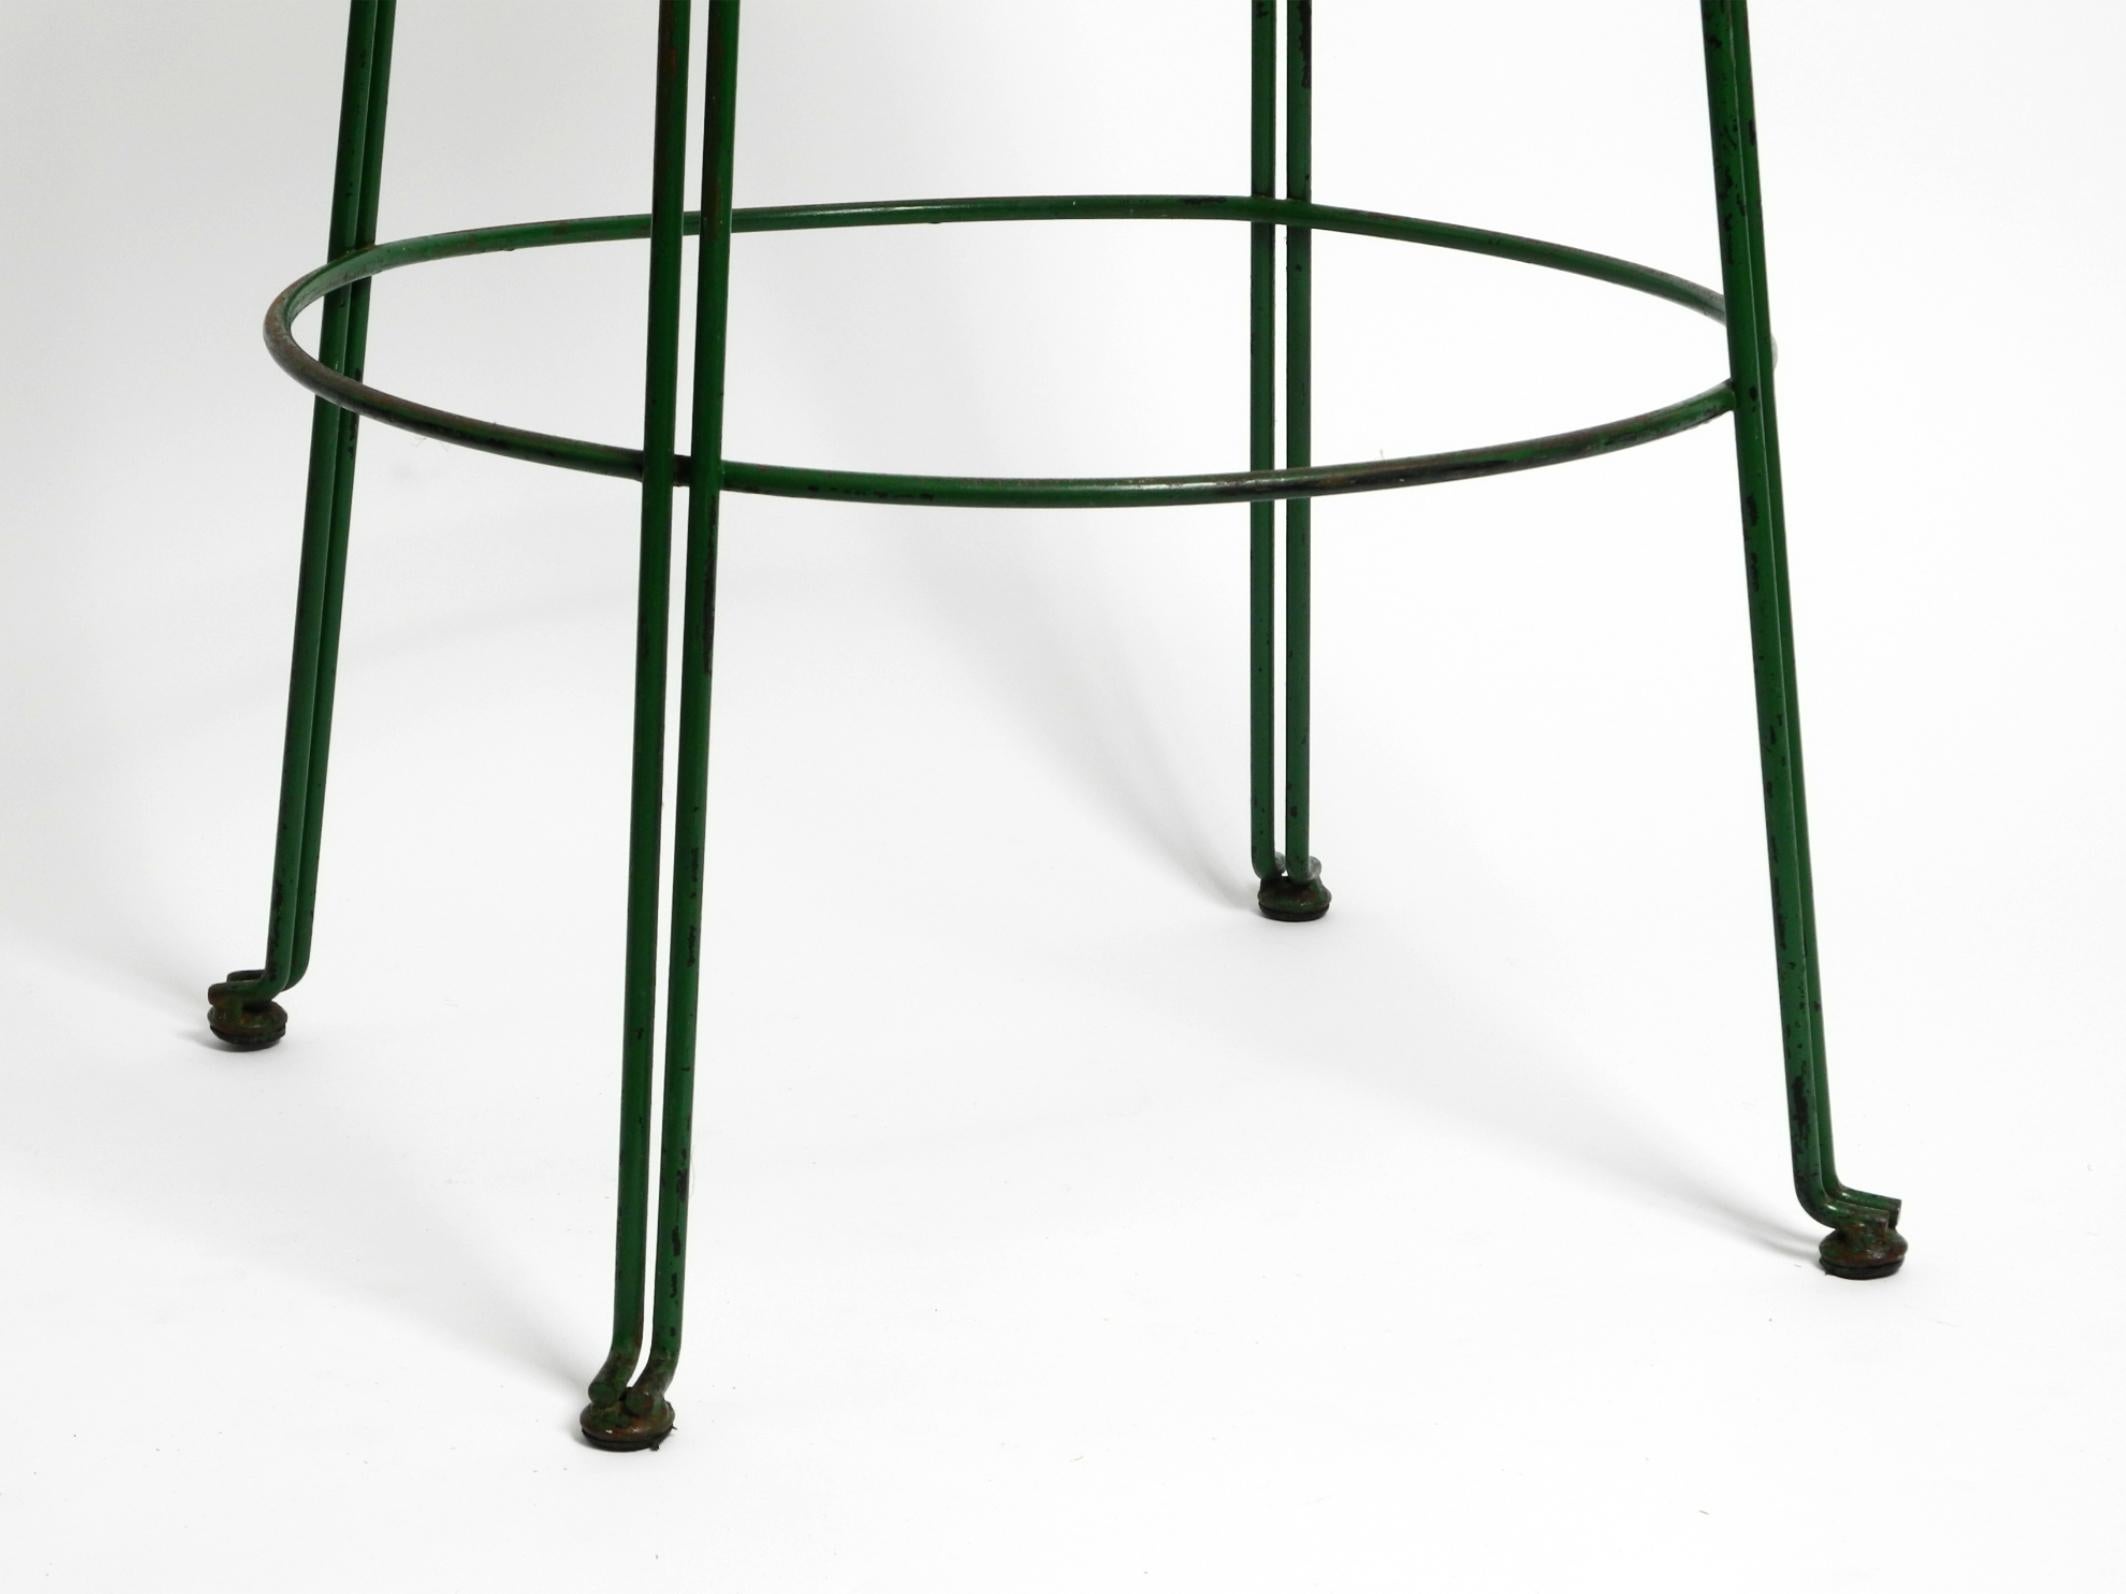 Italian 1960s bar stool made of green painted metal with perforated metal seat For Sale 2